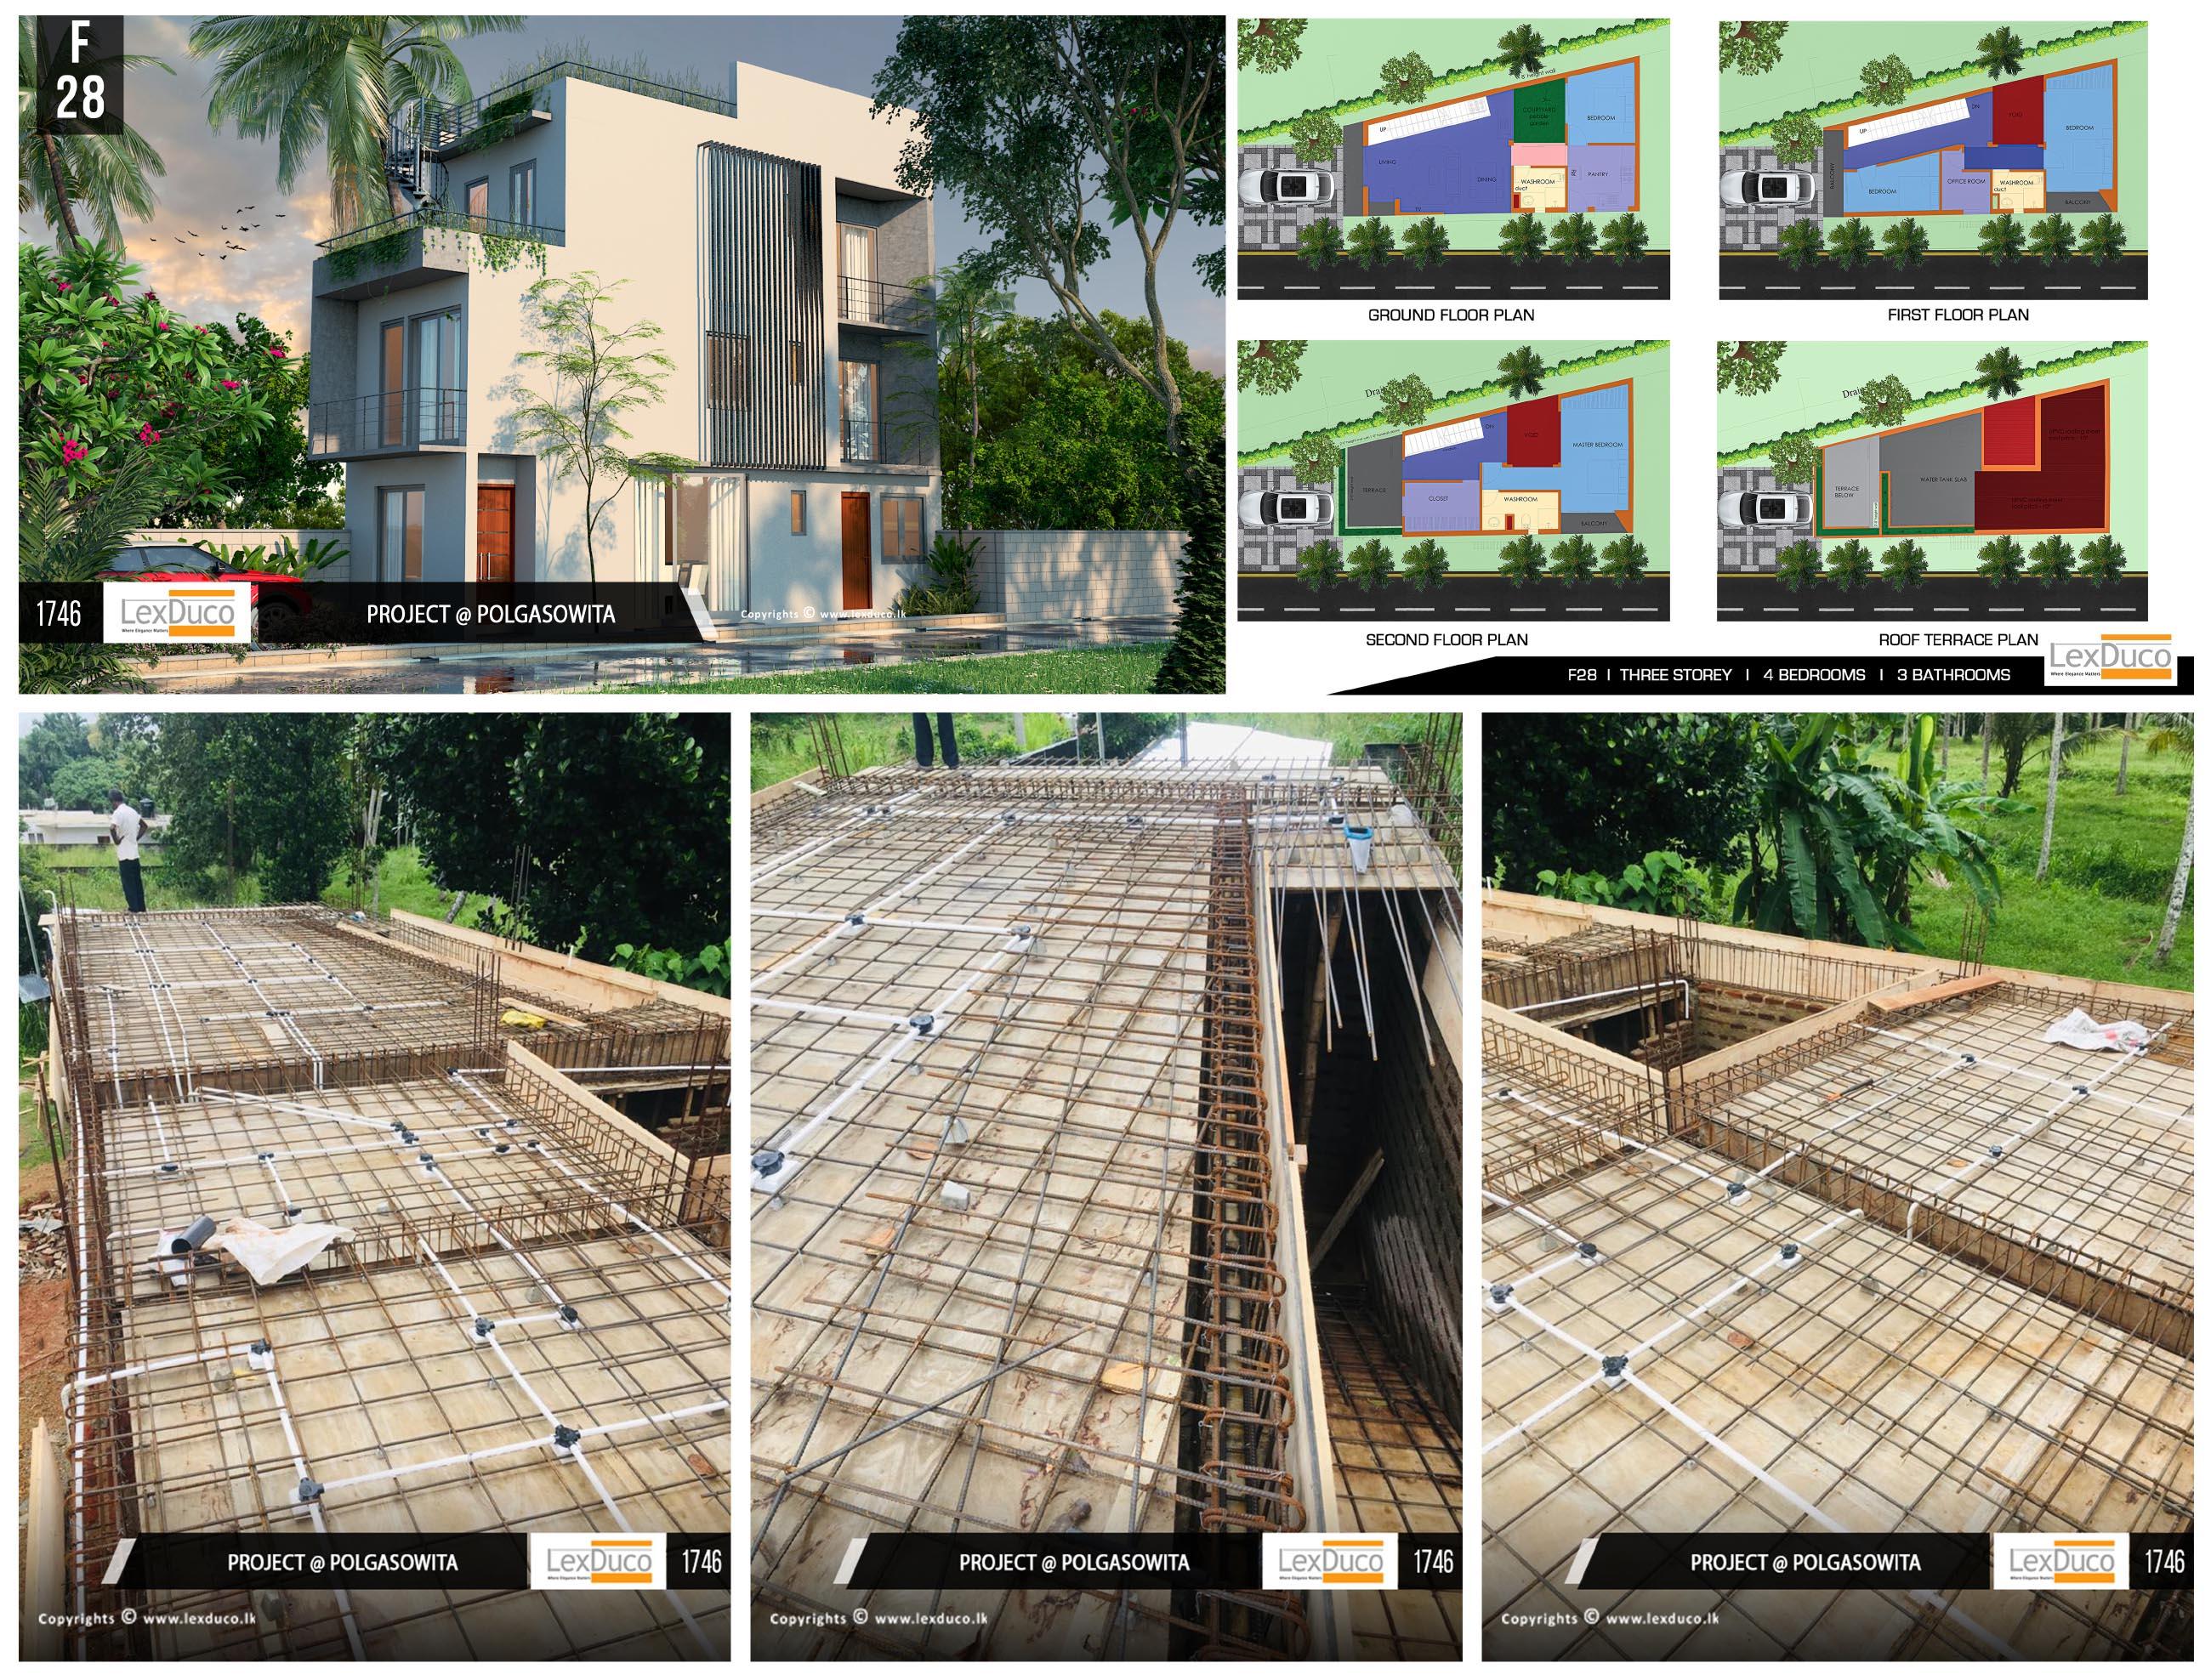 Residential Housing Project at Polgasowita | Lex Duco